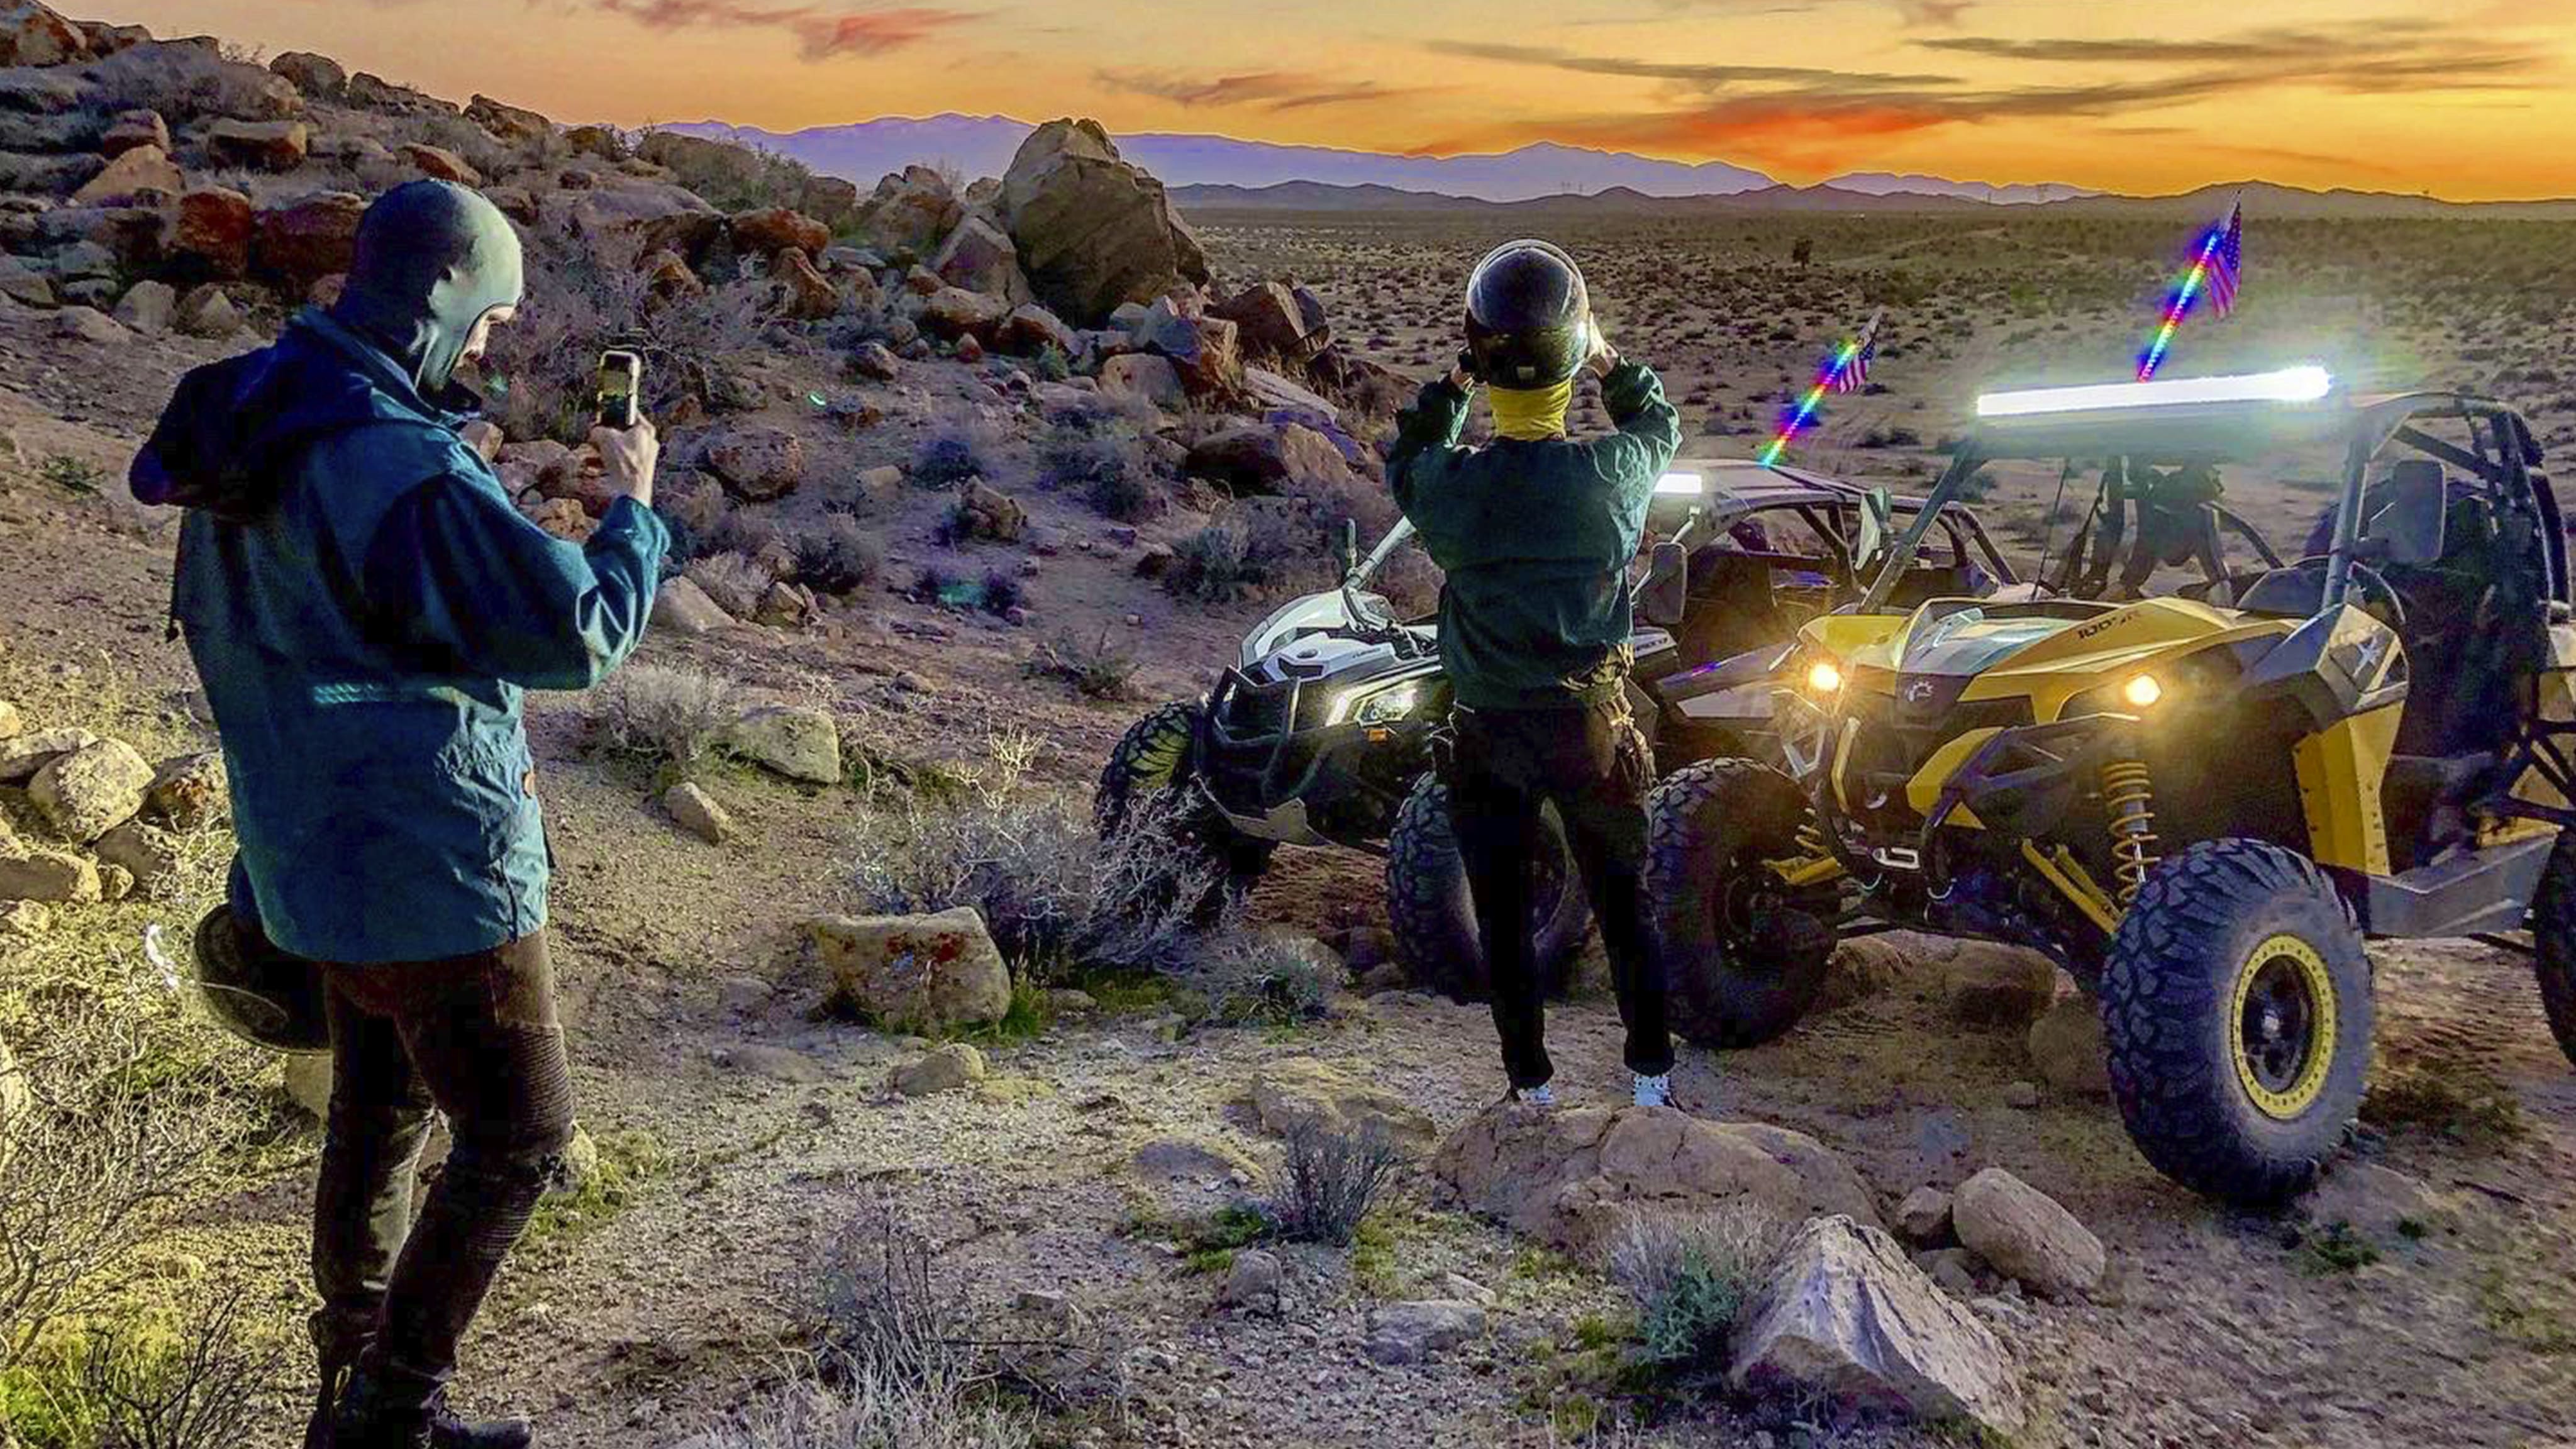 Can-Am riders looking at the sunset